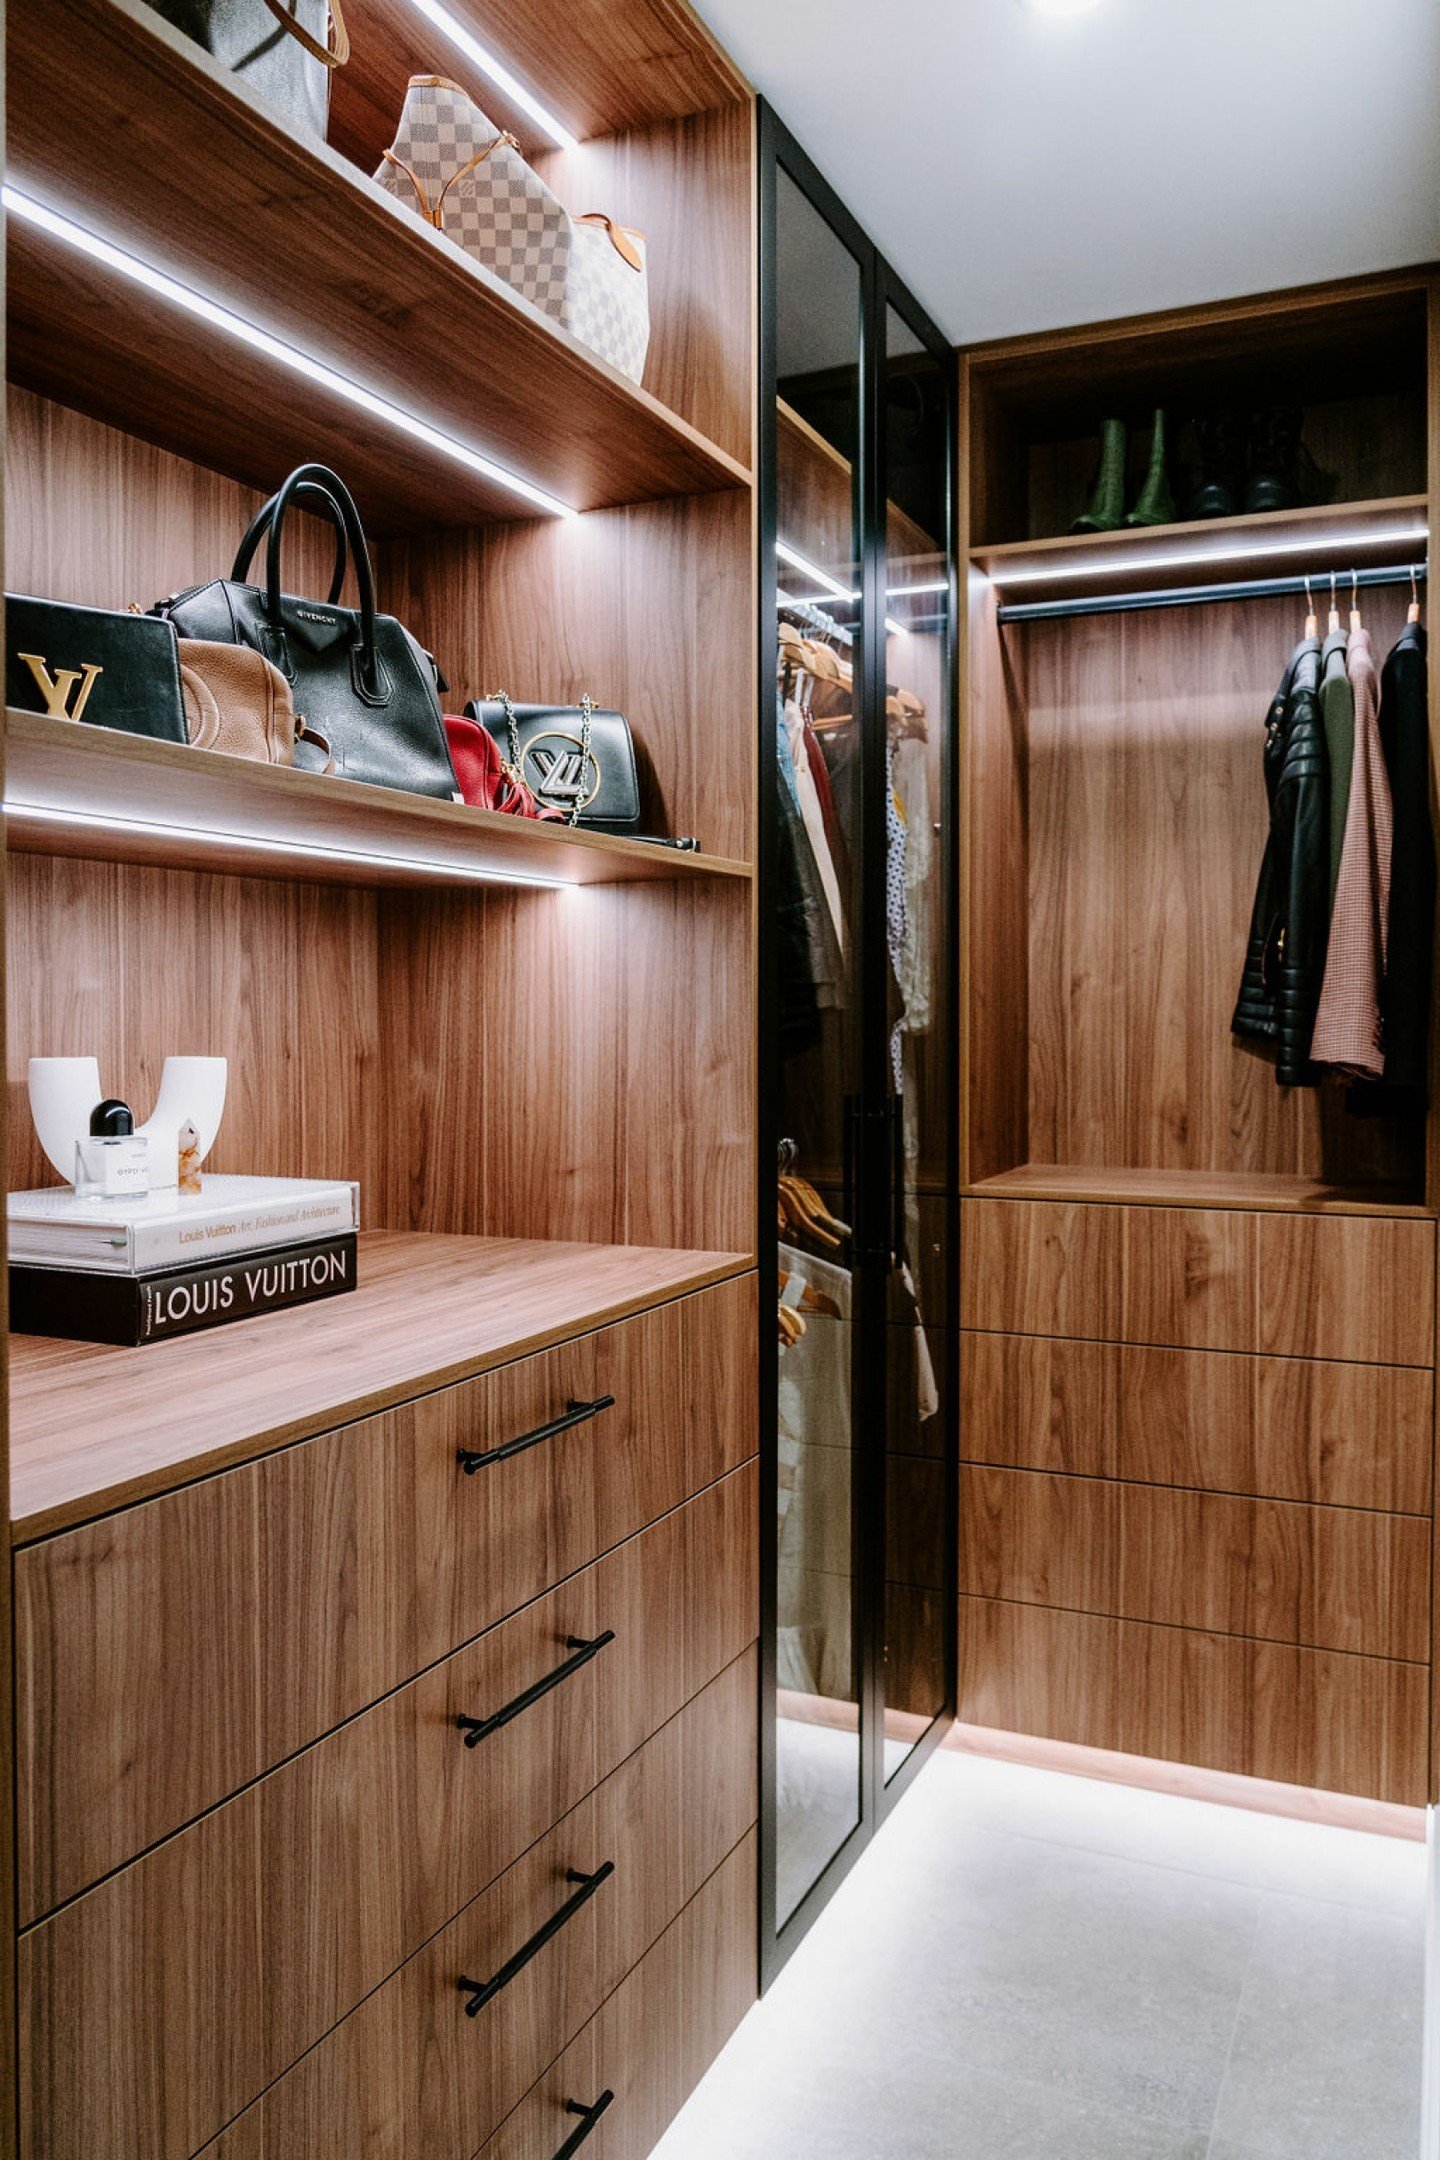 Designing a Functional Walk-In Wardrobe

Create a stylish and functional walk-in wardrobe with these 4 tips to maximise space and enhance organisation.

Optimise Layout: Plan your wardrobe layout based on your clothing needs. Allocate space for hangi